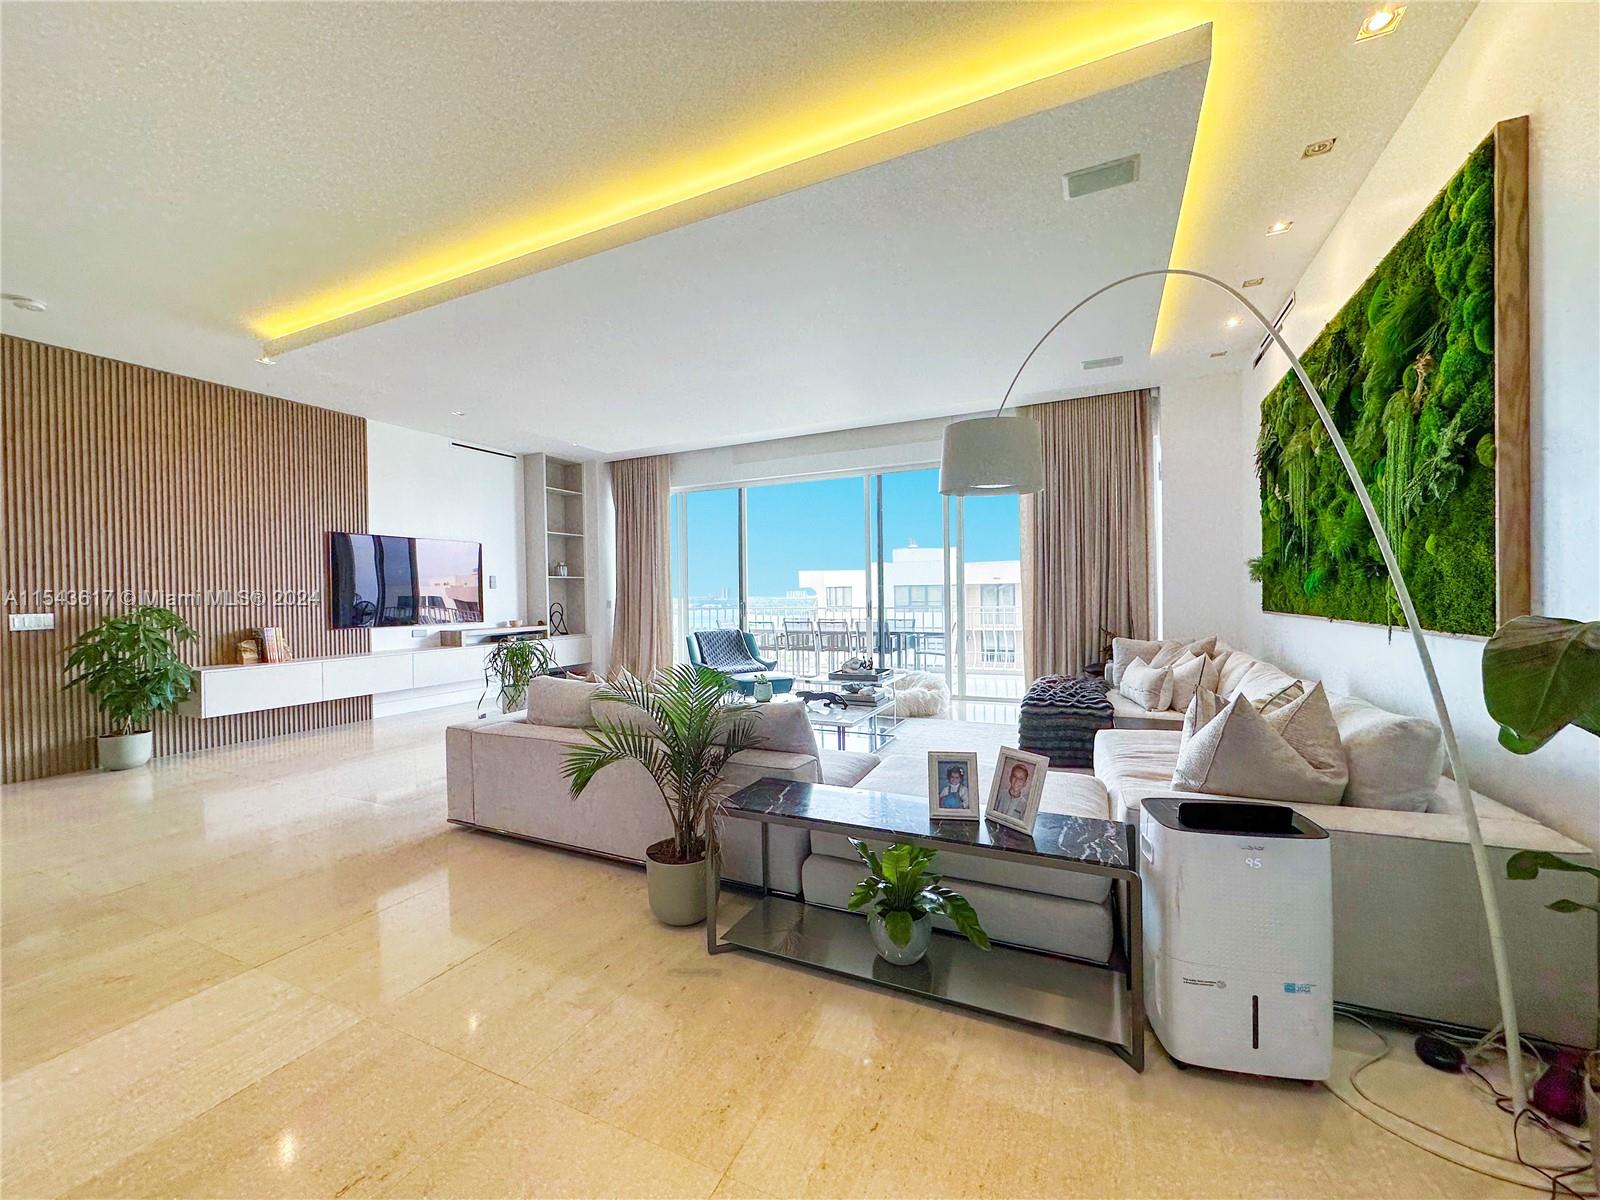 Gorgeous renovated condo in luxurious Bal Harbour 101! This 2,525 sqft gem offers exceptional views, living space & amenities. Gaze at the ocean & bay on your large private terrace while you entertain. PH8 boasts elegant features like 11 ft ceilings, limestone flrs, modern lighting, electric blinds, Italian finishes, Hi-End built-in closets by Molteni & Dada & polished Hans Grohe fixtures by Patricia Urquiola in all 4 baths. Living comfort is optimized w/ 4 BD's & a sprawling open layout for entertaining including a hi-end chef’s kitchen by Dada w/ Miele appliances. Elevating the lifestyle is a health spa, rooftop gym, restaurant & Lounge w/ additional upcoming amenities such as pickleball, huge jacuzzi & more! Prime location, walkable to glamorous Bal Harbour Shops & Places of Worship.